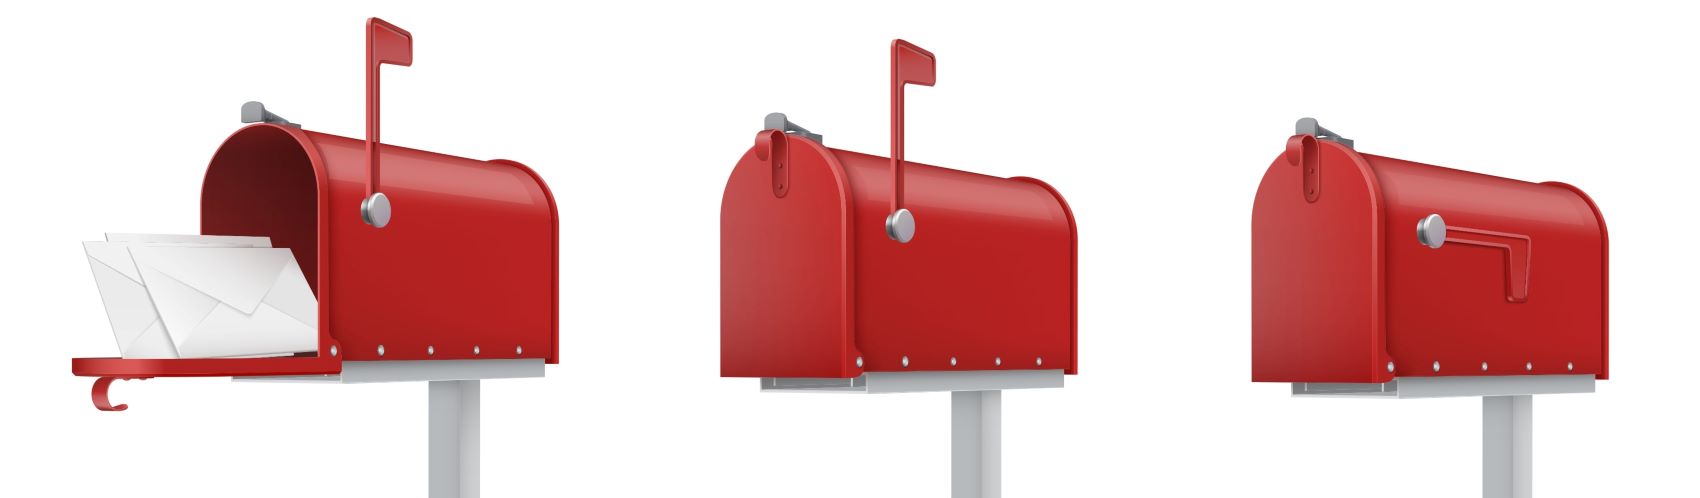 Automotive Direct Mail Advertising